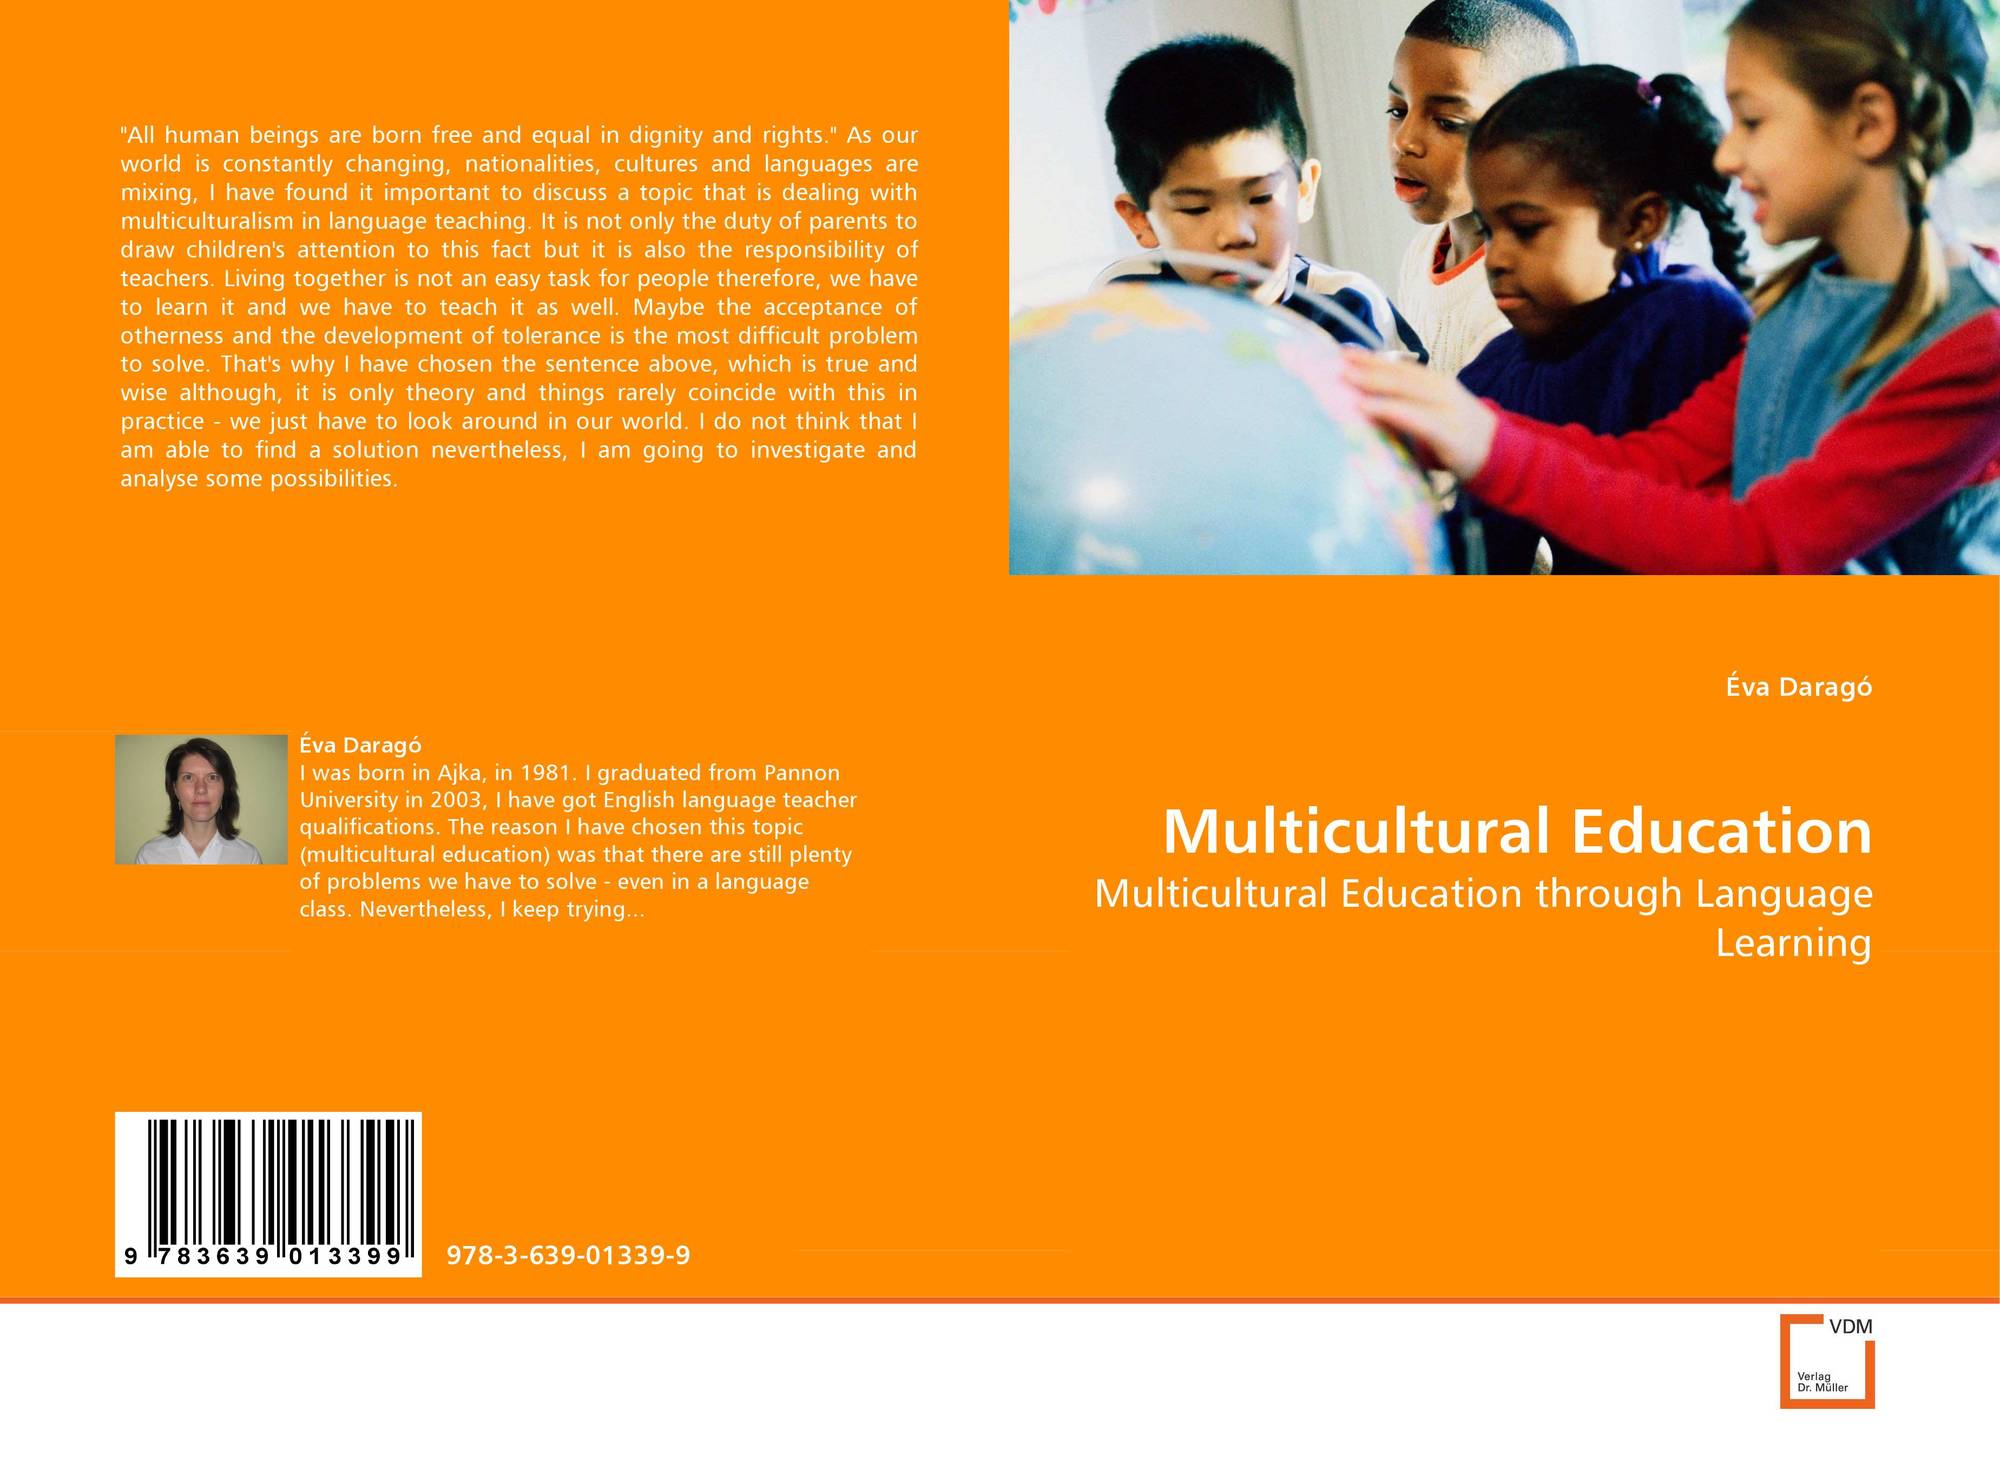 Multicultural Education, 12 12 61212 01121212 12, 1261212011212125 ...